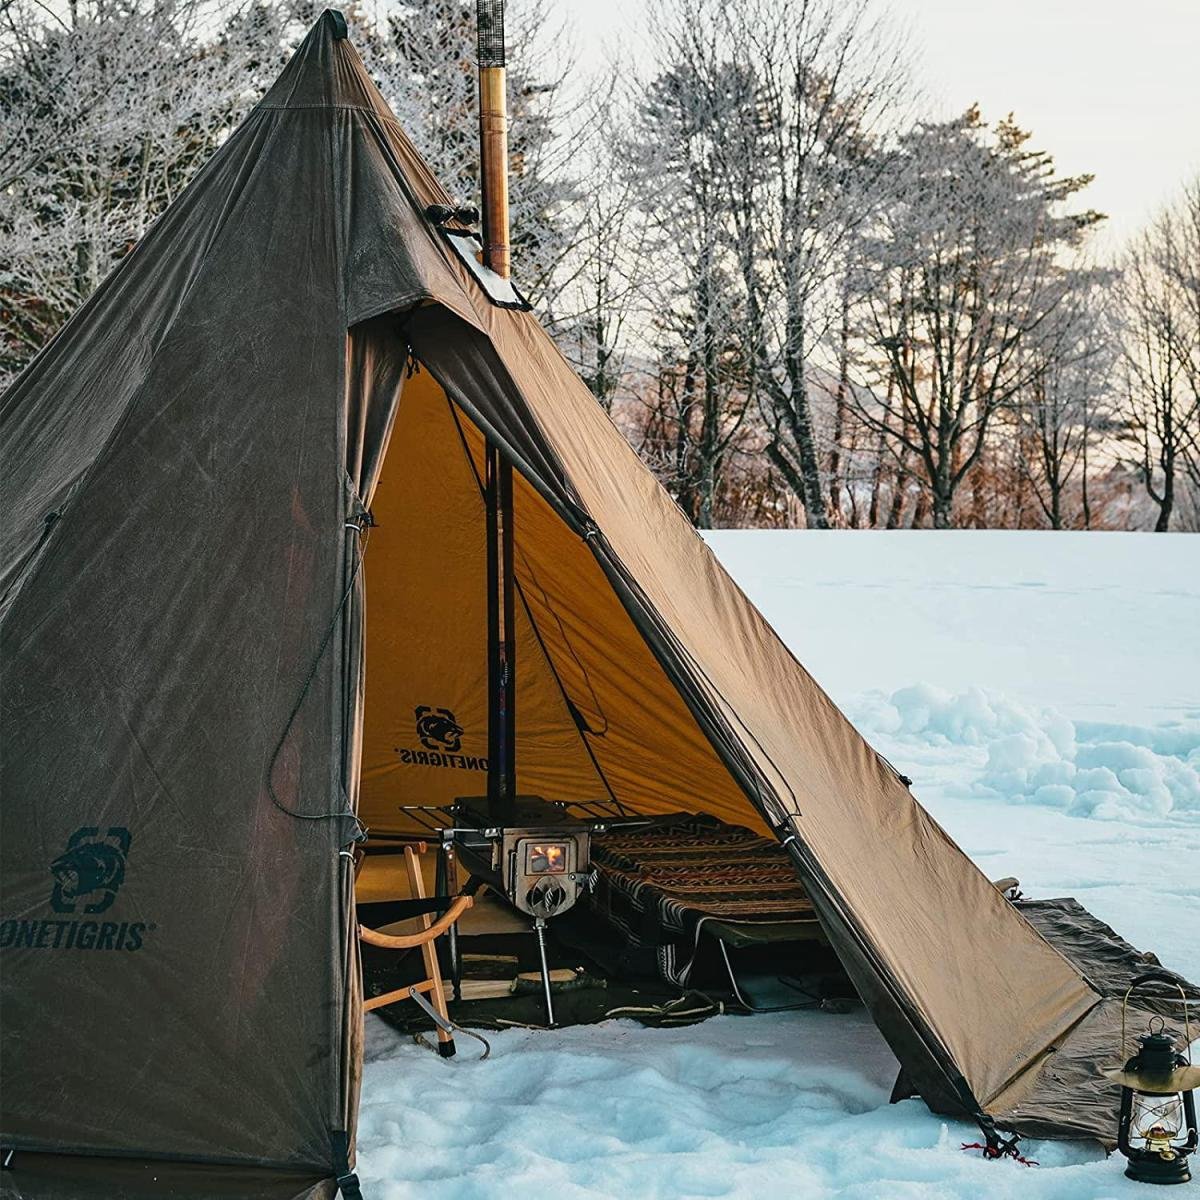 10 Best Hot Tents For Your Winter Camping Trip for 2023 - Outdoors with  Bear Grylls